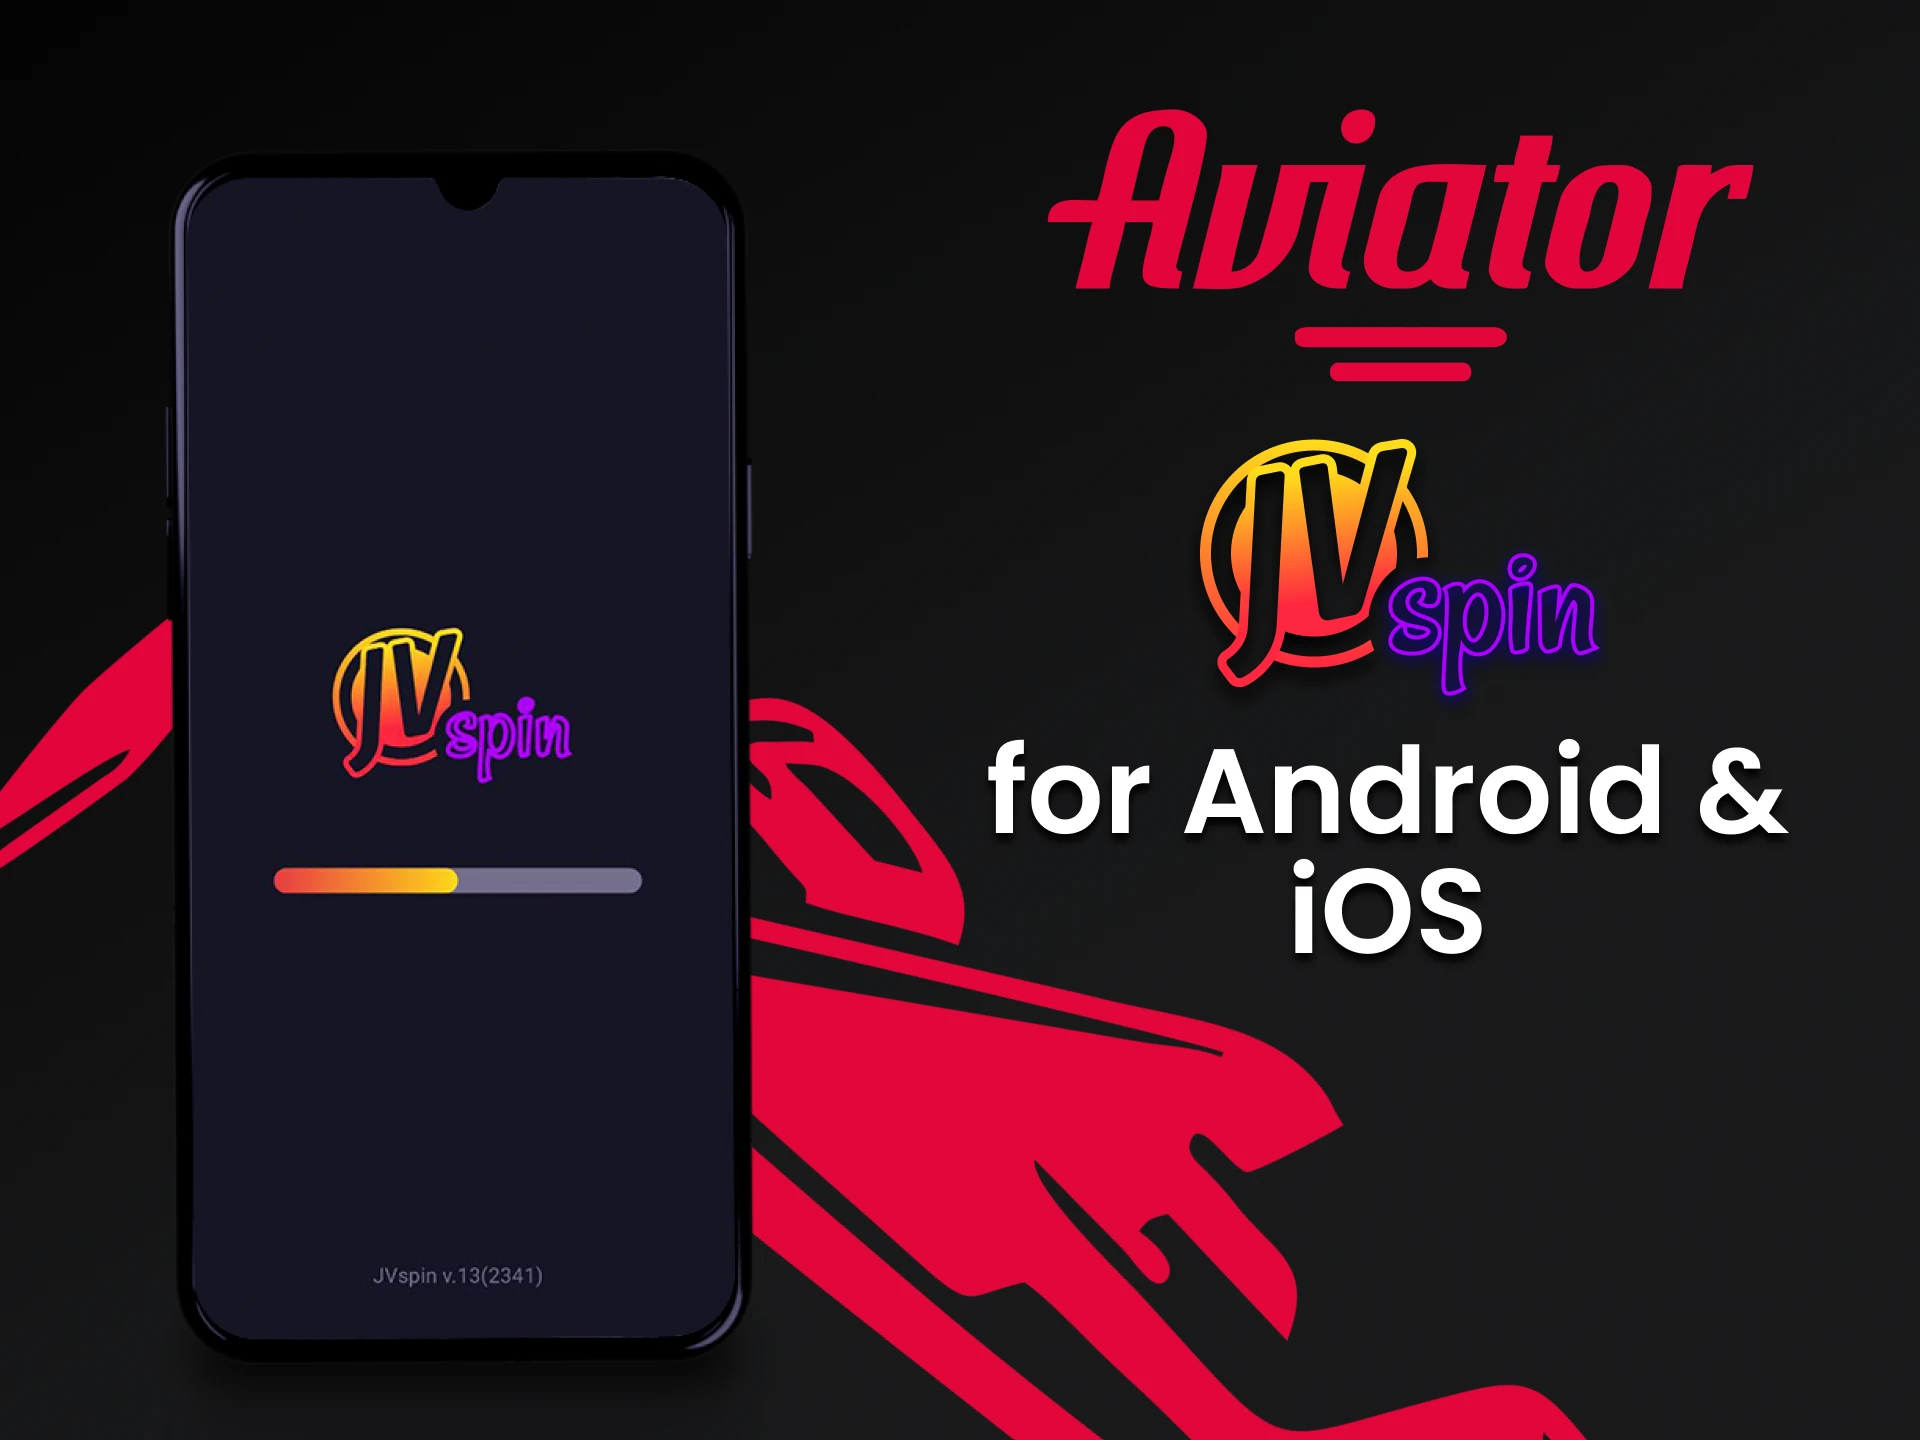 Use the JV Spin app to play Aviator.